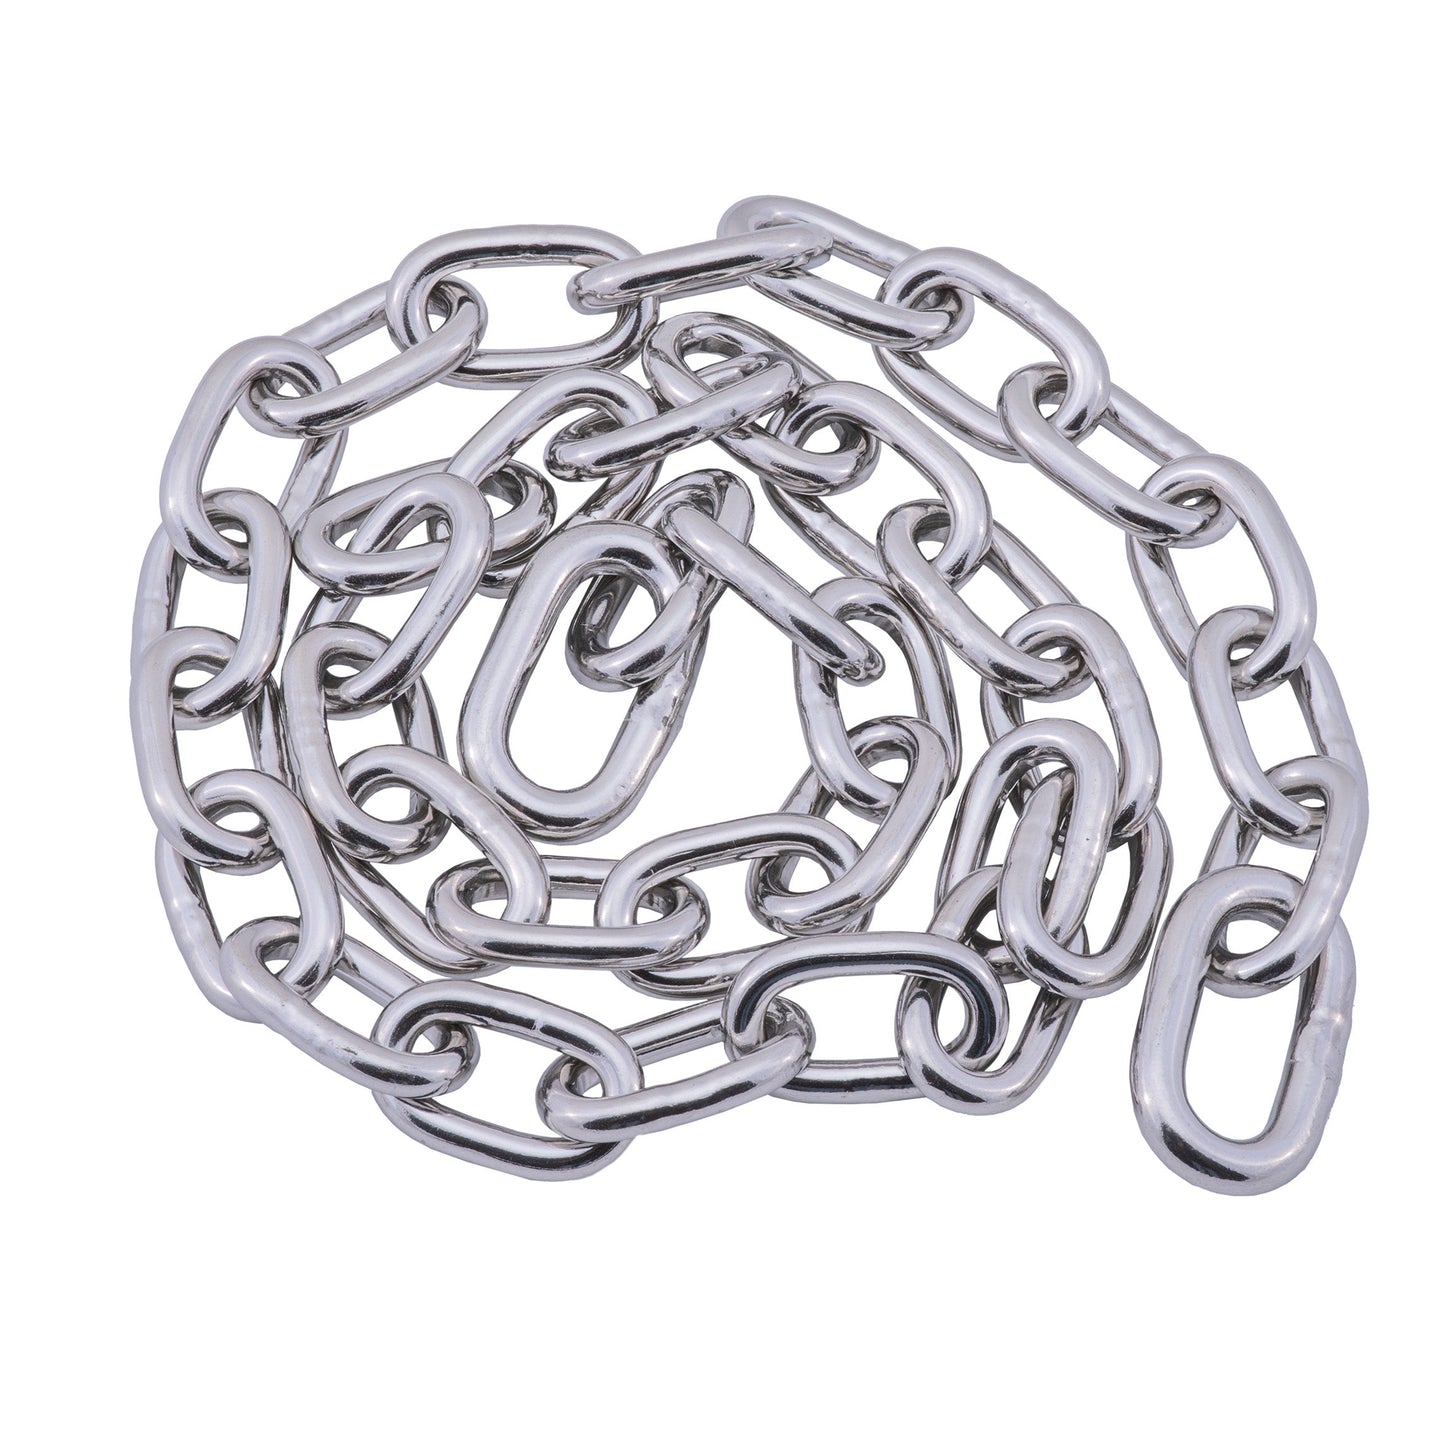 6' 316 Stainless Steel Anchor Chain with 3/8" Chain Link